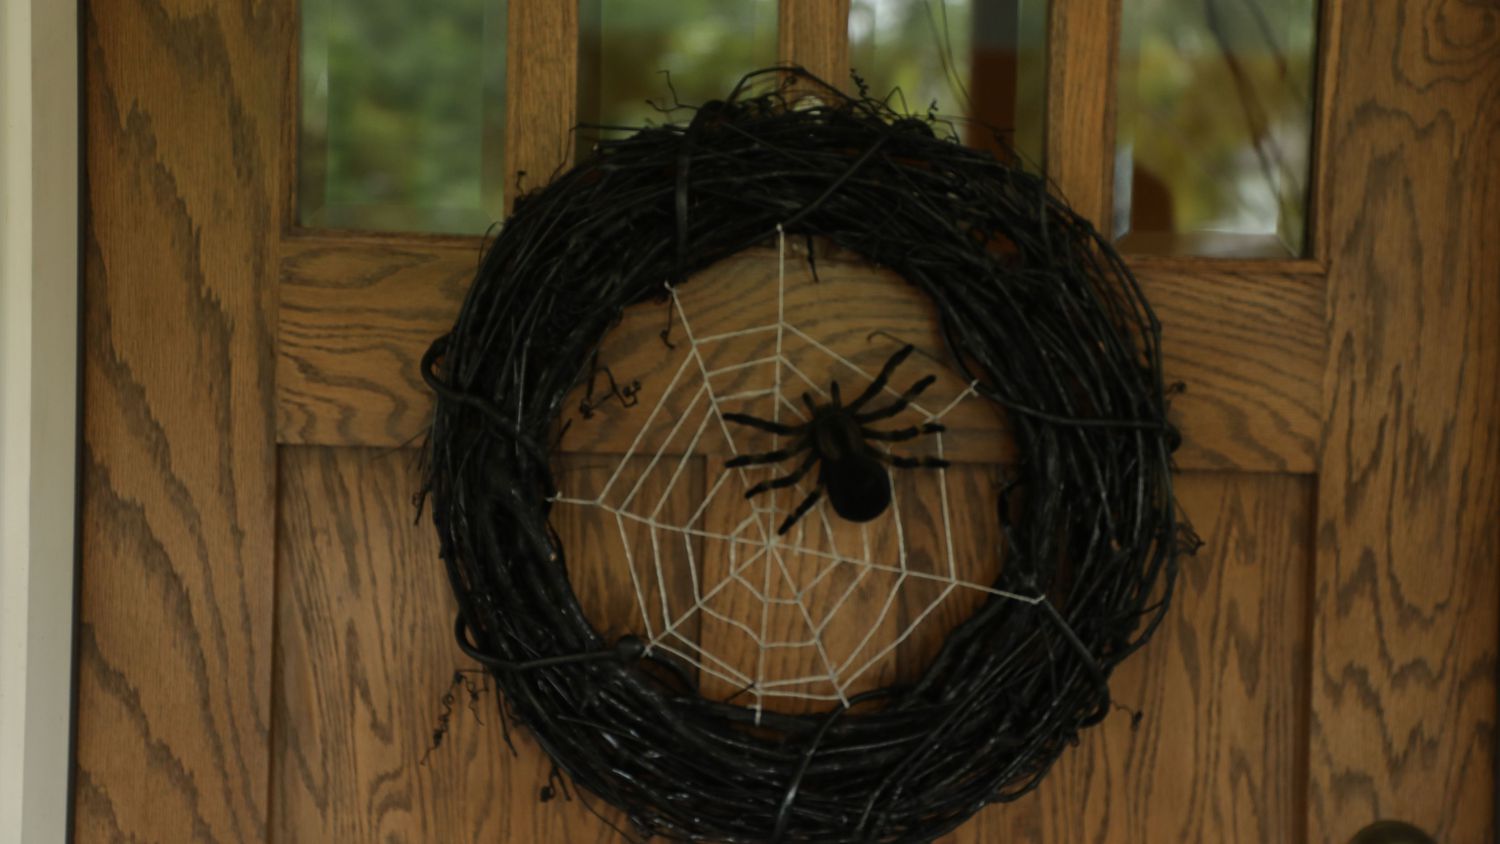 How to Make a Spider Wreath